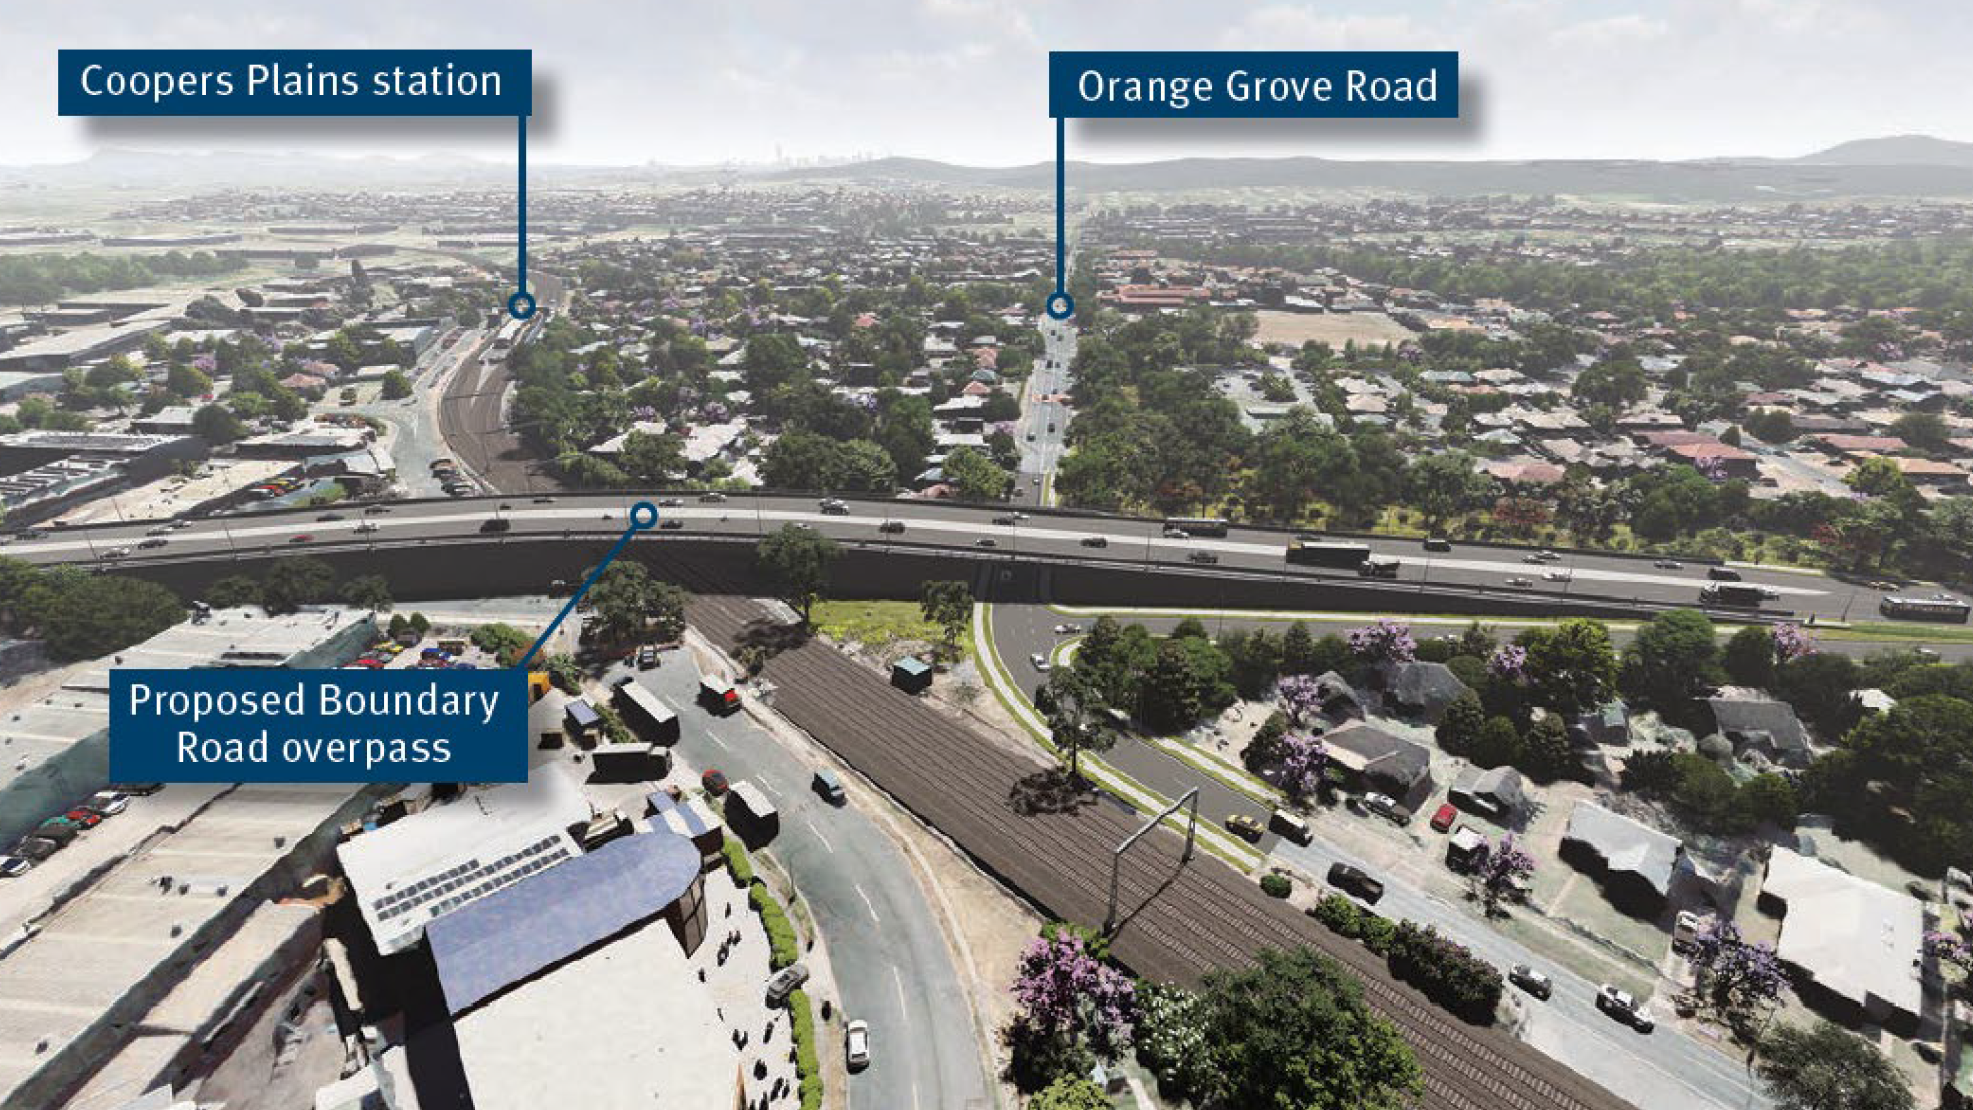 Artist impression of option 1: Boundary Road overpass.